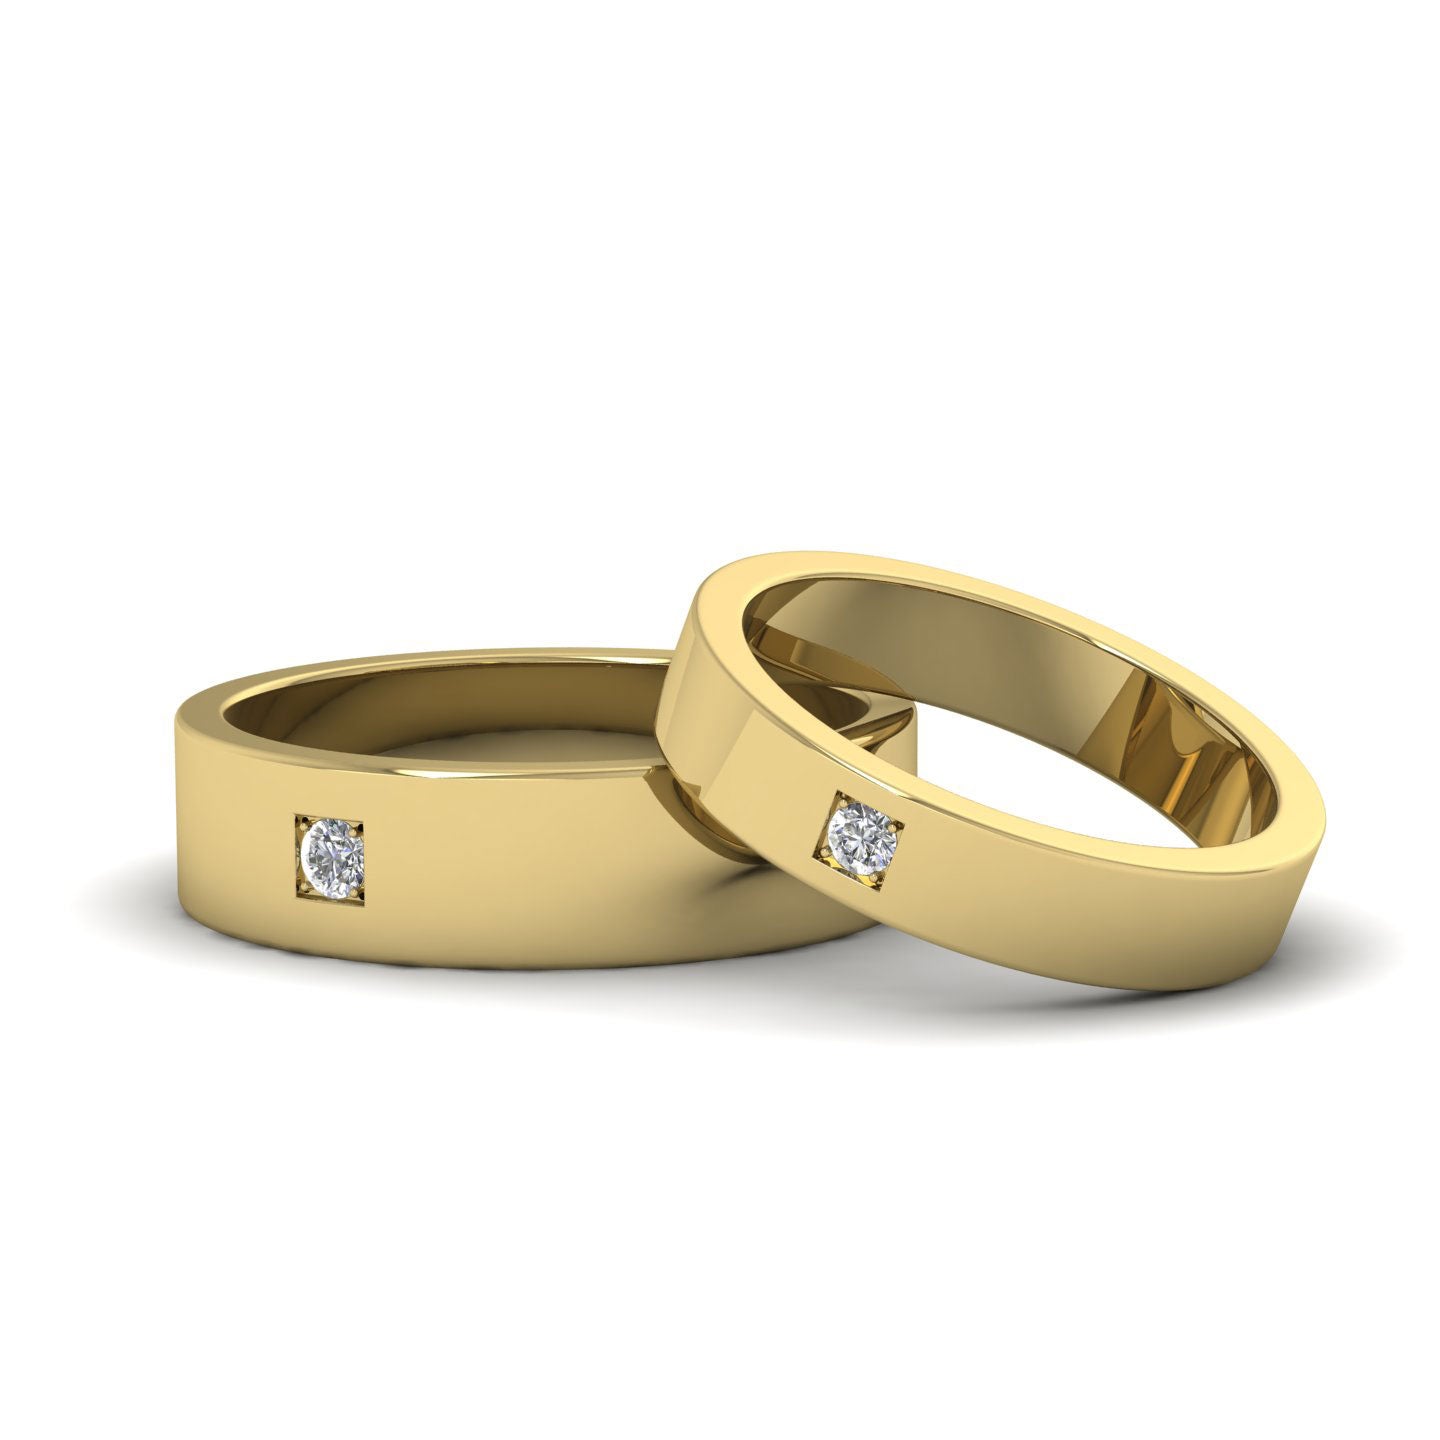 Single Diamond With Square Setting 9ct Yellow Gold 6mm Wedding Ring